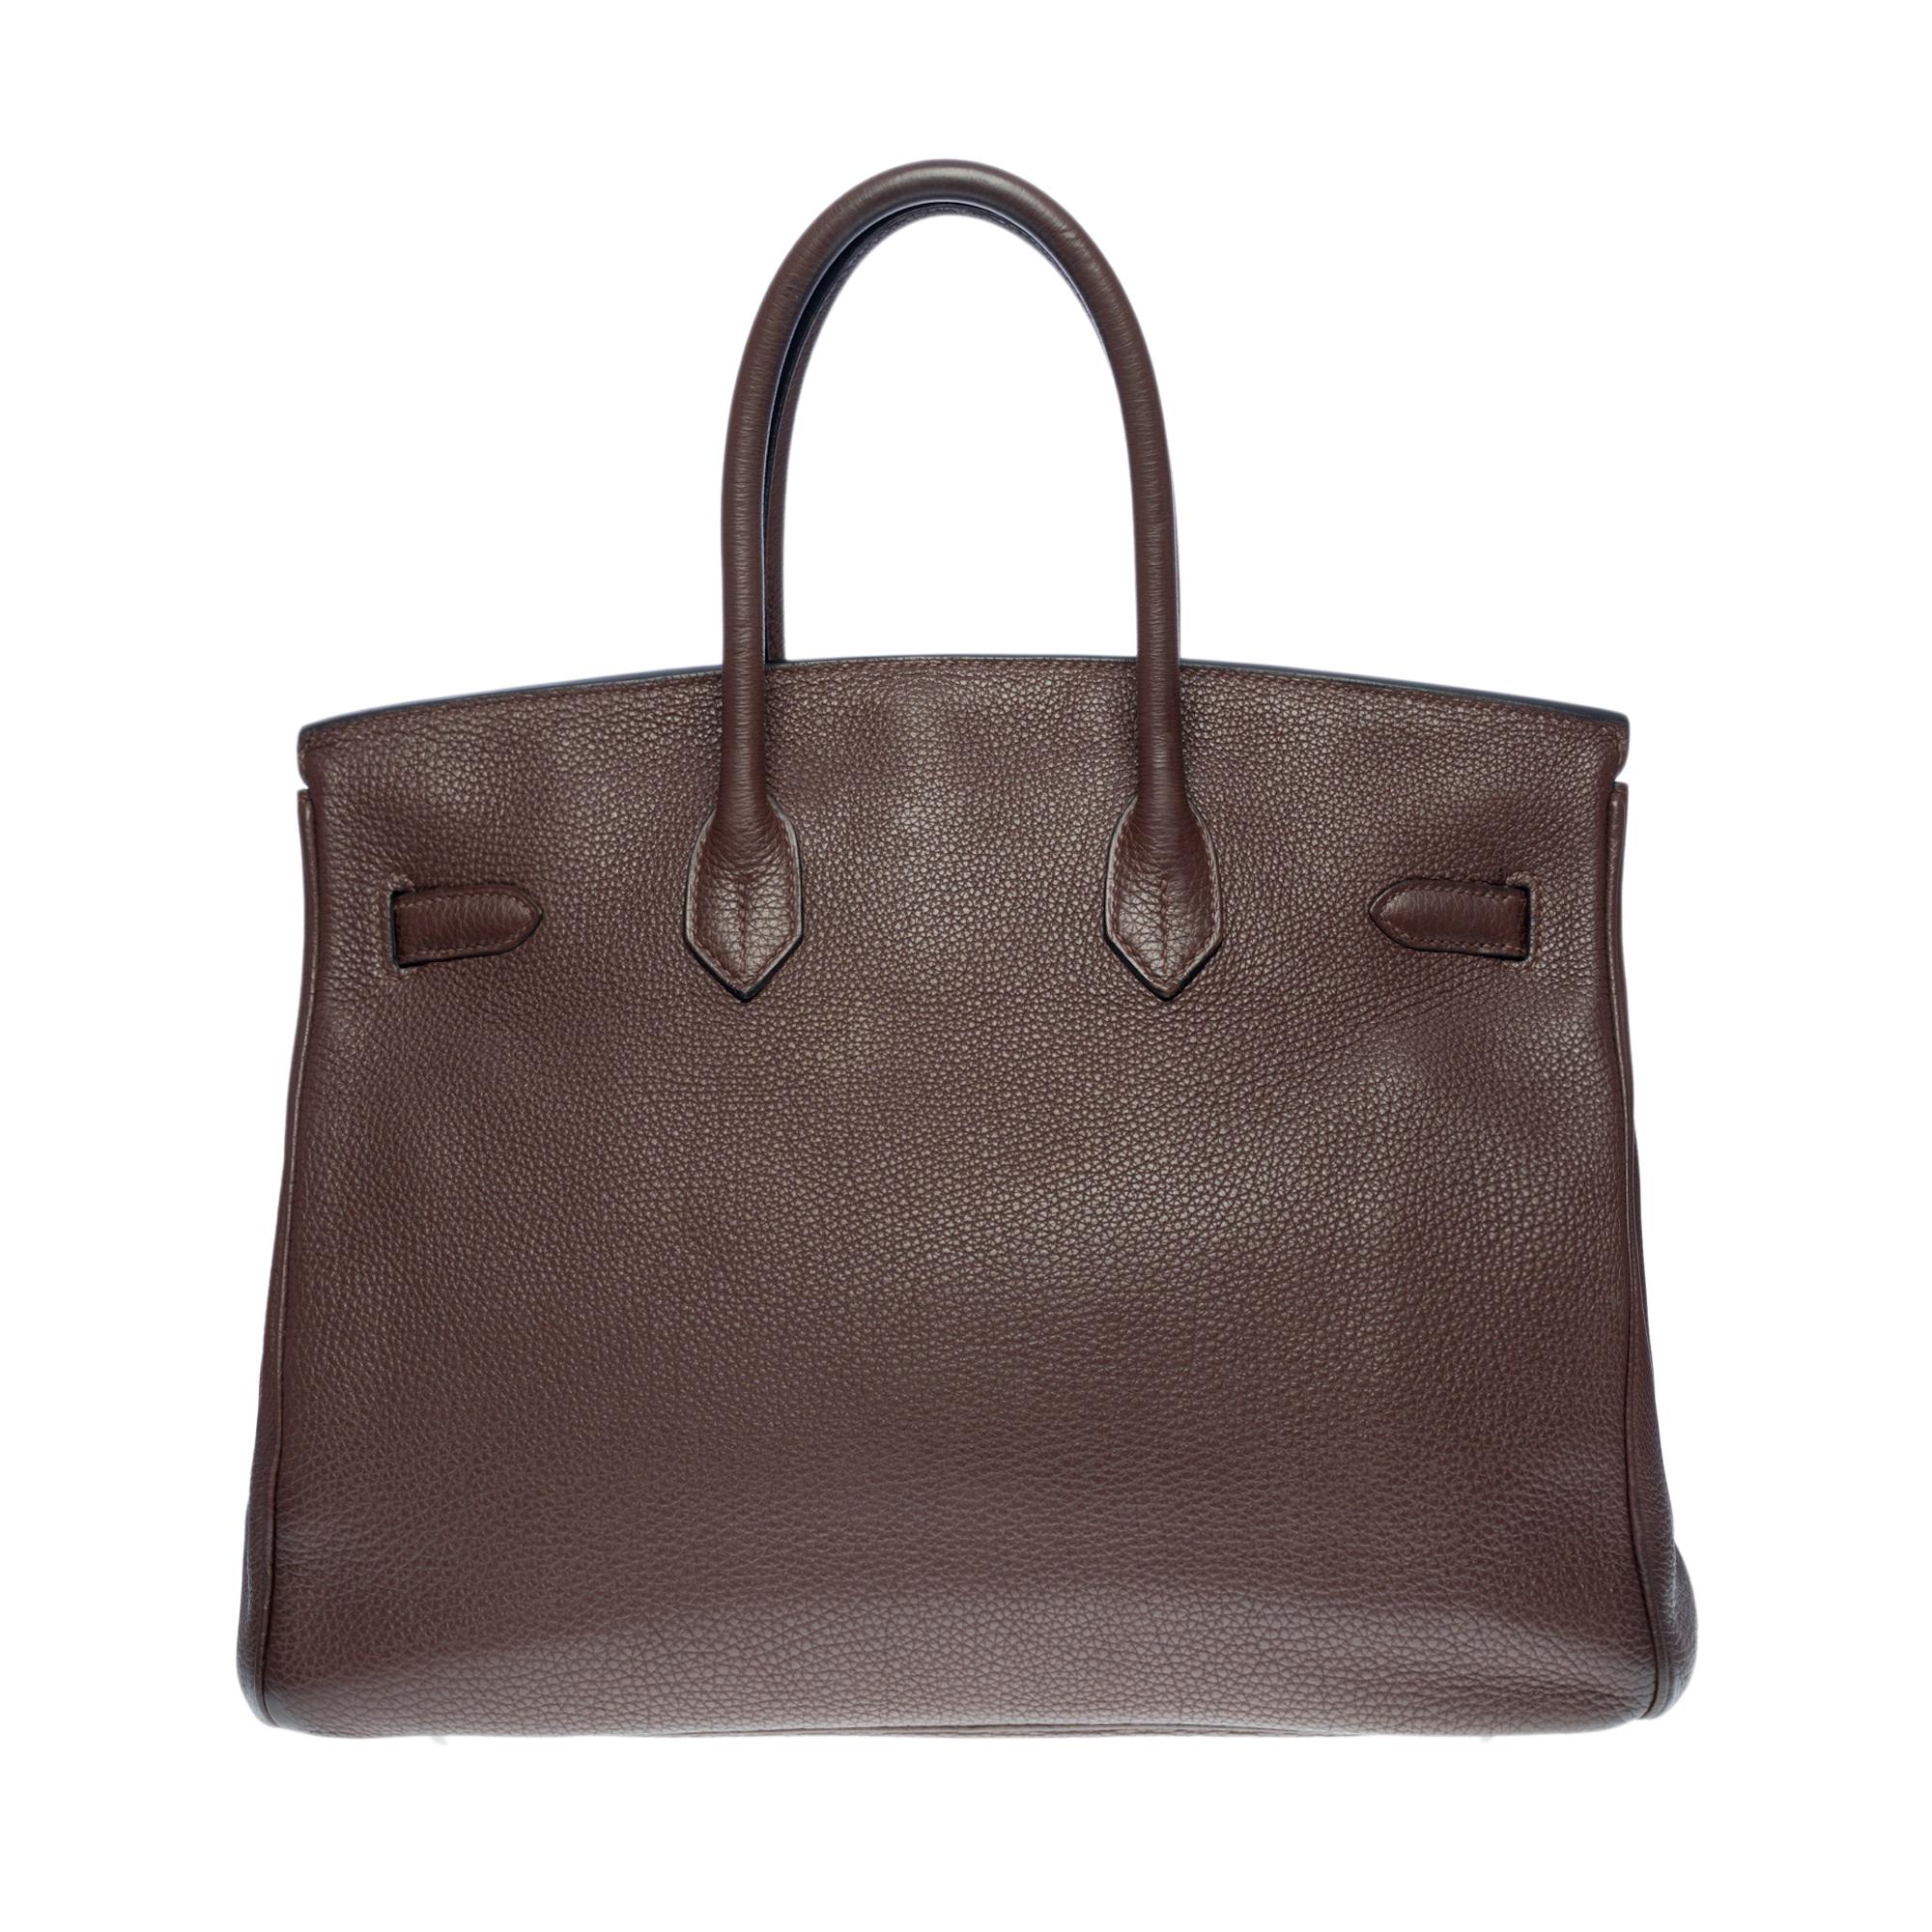 Splendid Hermes Birkin 35 cm handbag in brown Taurillon Clémence leather, palladium silver metal hardware, double handle in brown leather allowing a hand carry

Flap closure
Inner lining in brown leather, one zippered pocket, one patch